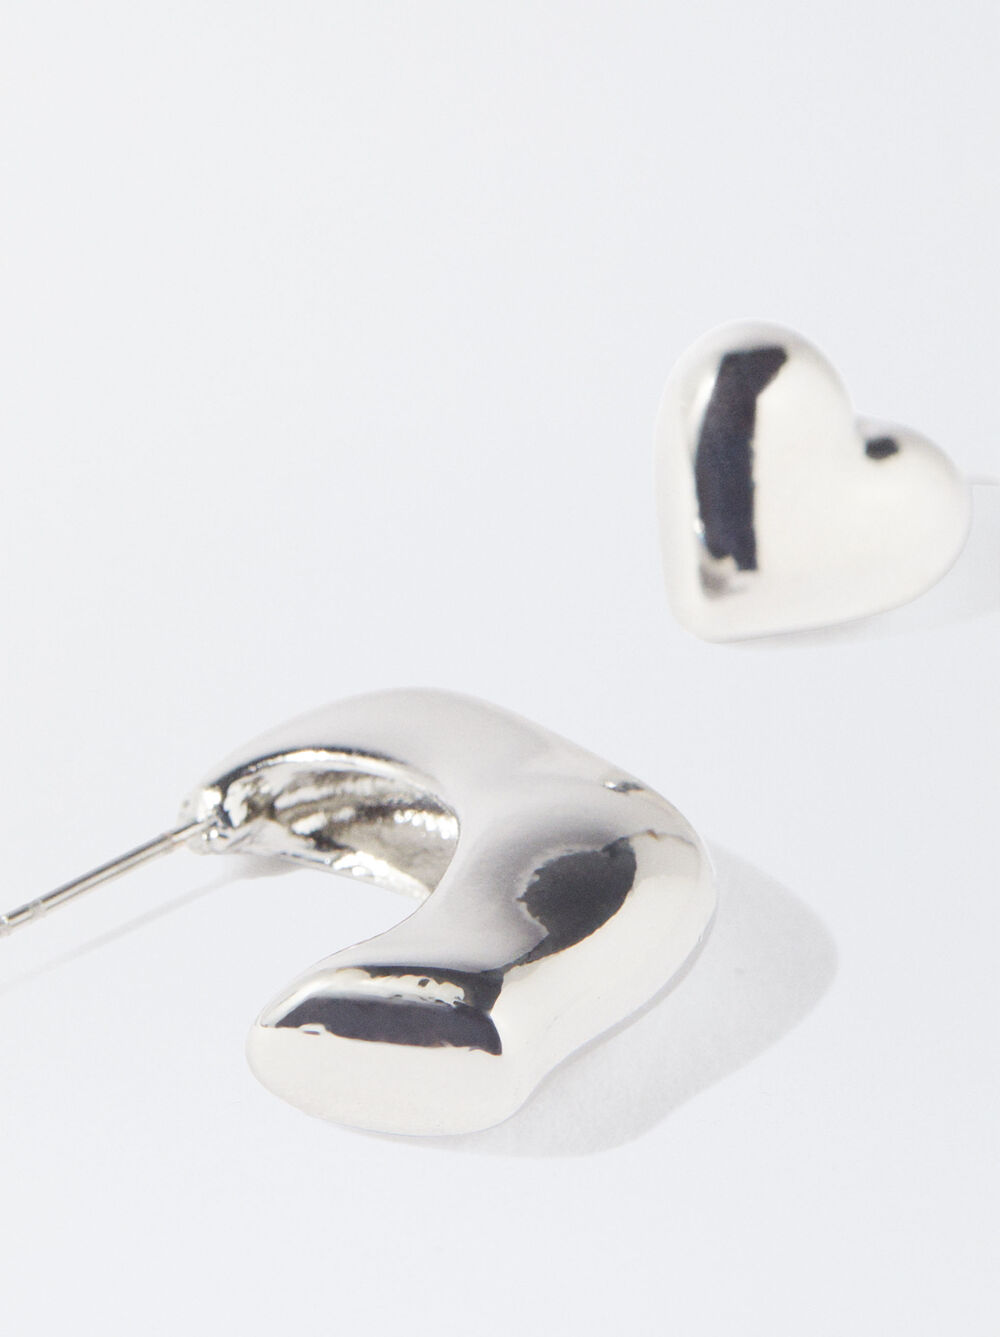 Set Of Silver-Plated Earrings